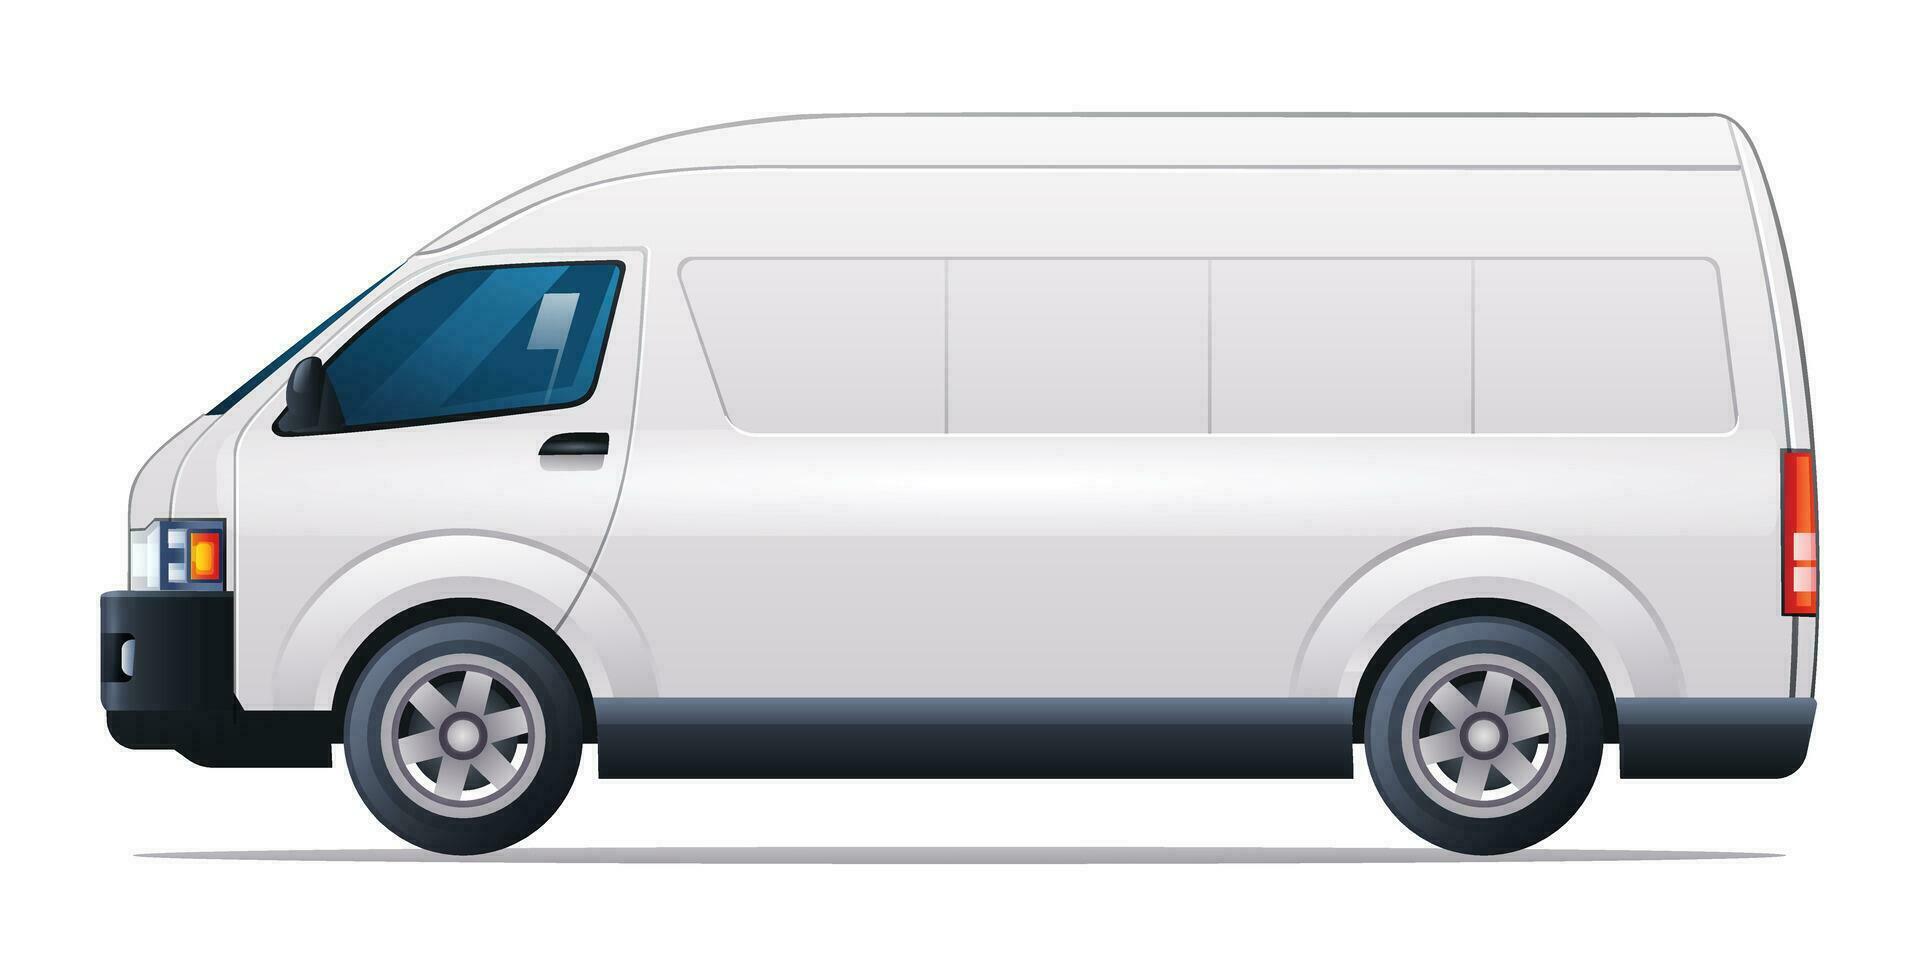 Minibus vector illustration. Minivan side view isolated on white background